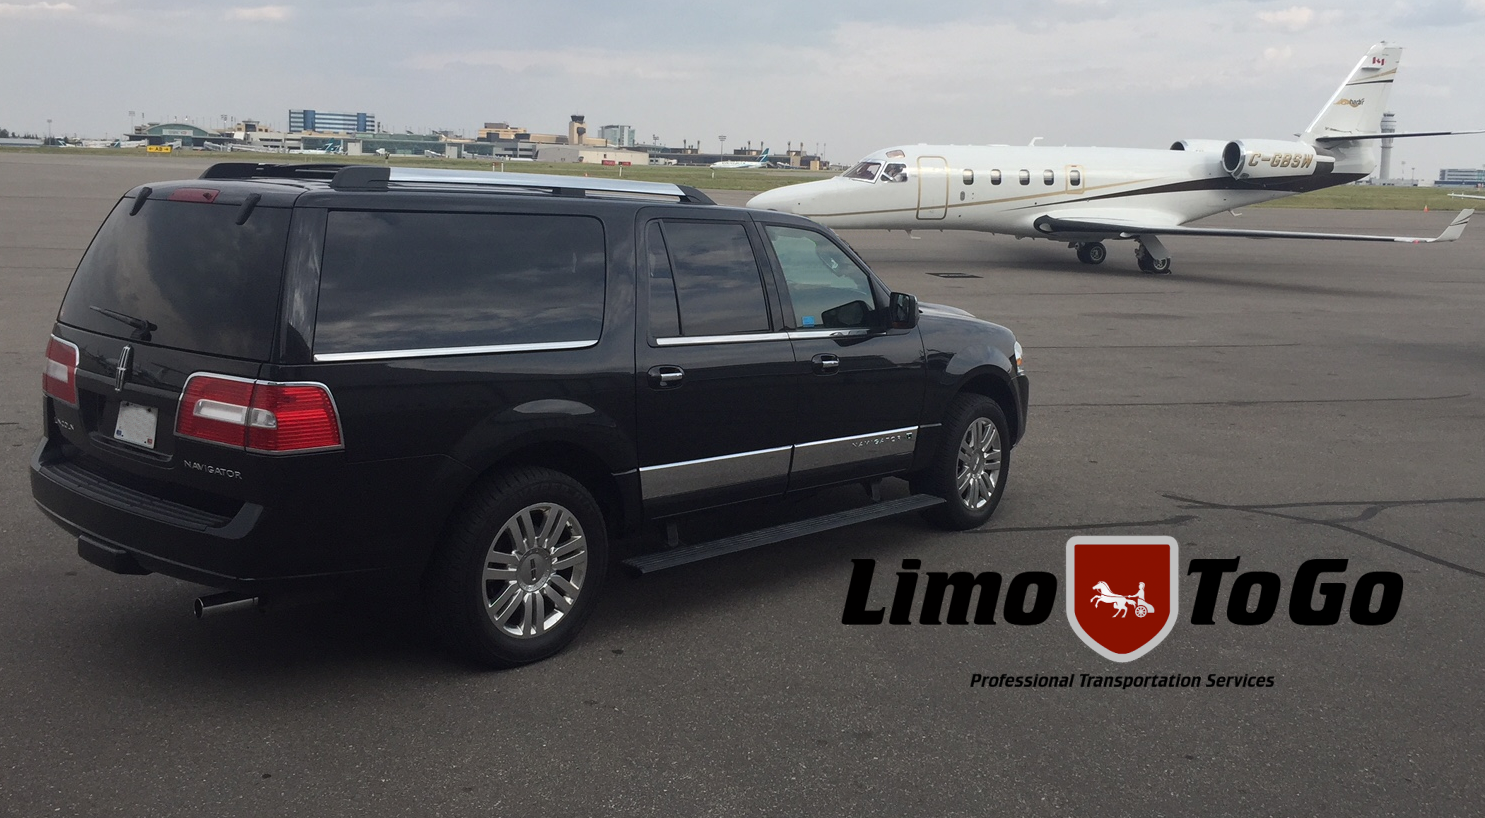 Black SUV parked beside private jet on runway